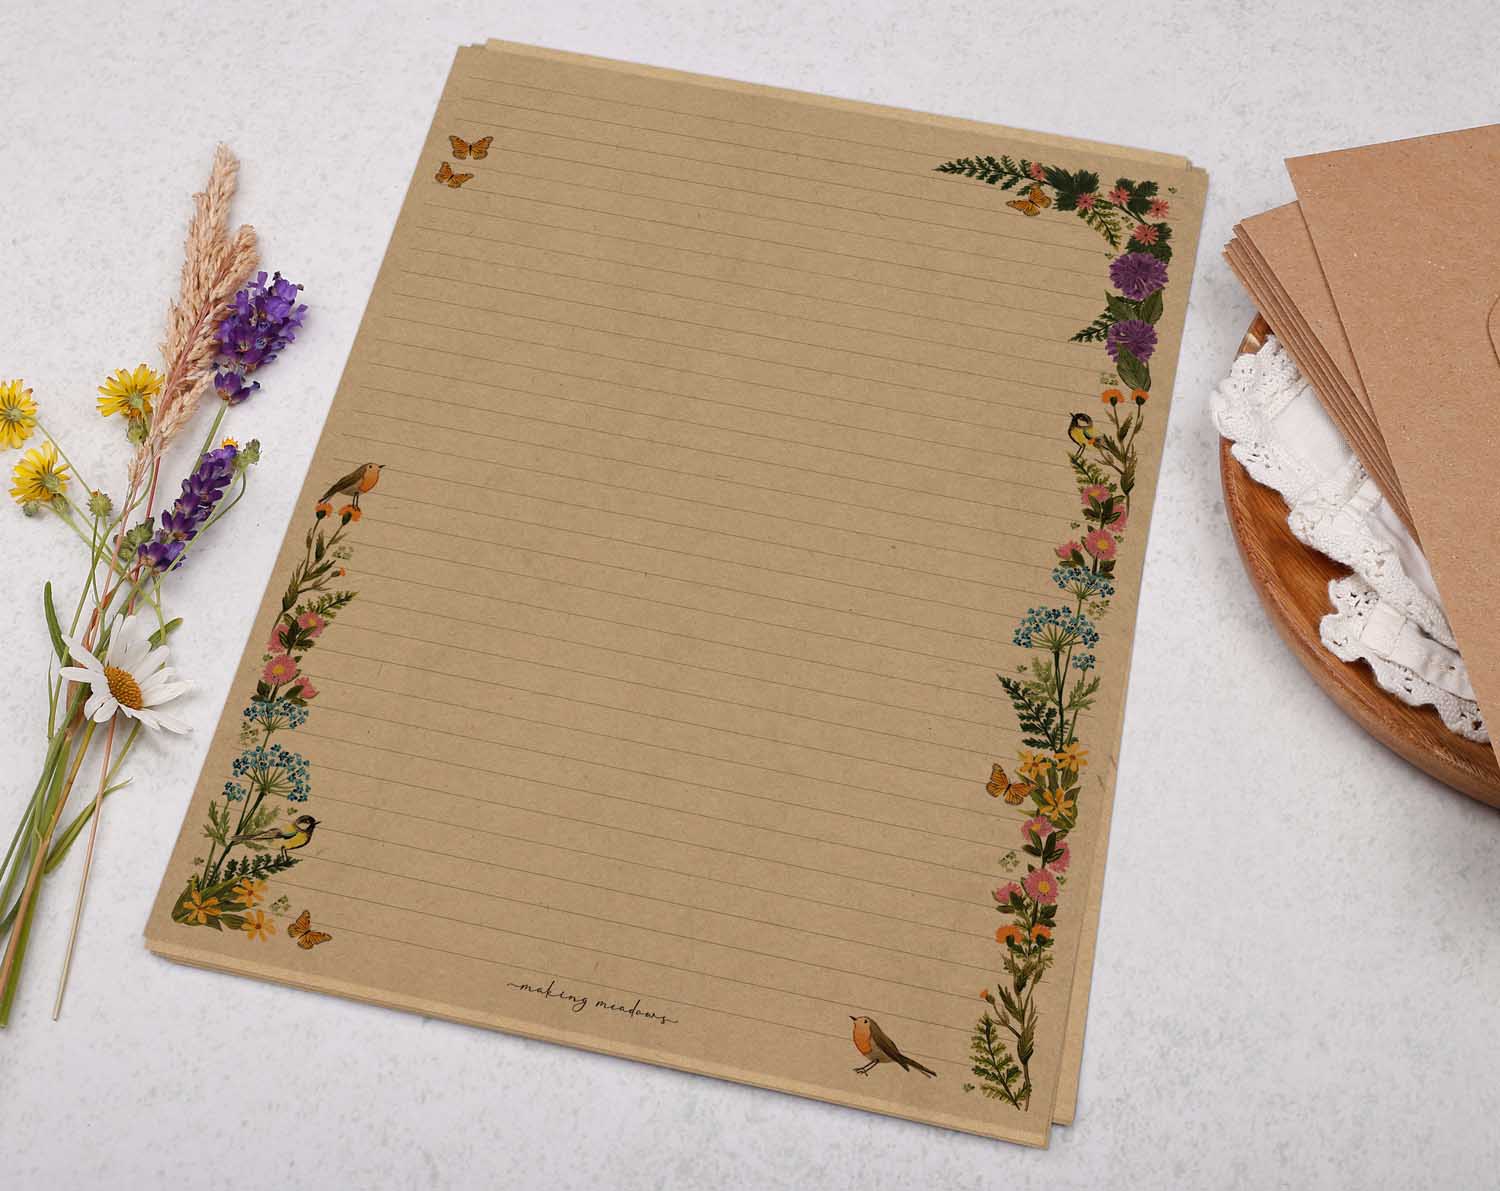 A4 Kraft letter writing paper sheets with a beautiful floral watercolour border design cascading around the edge.